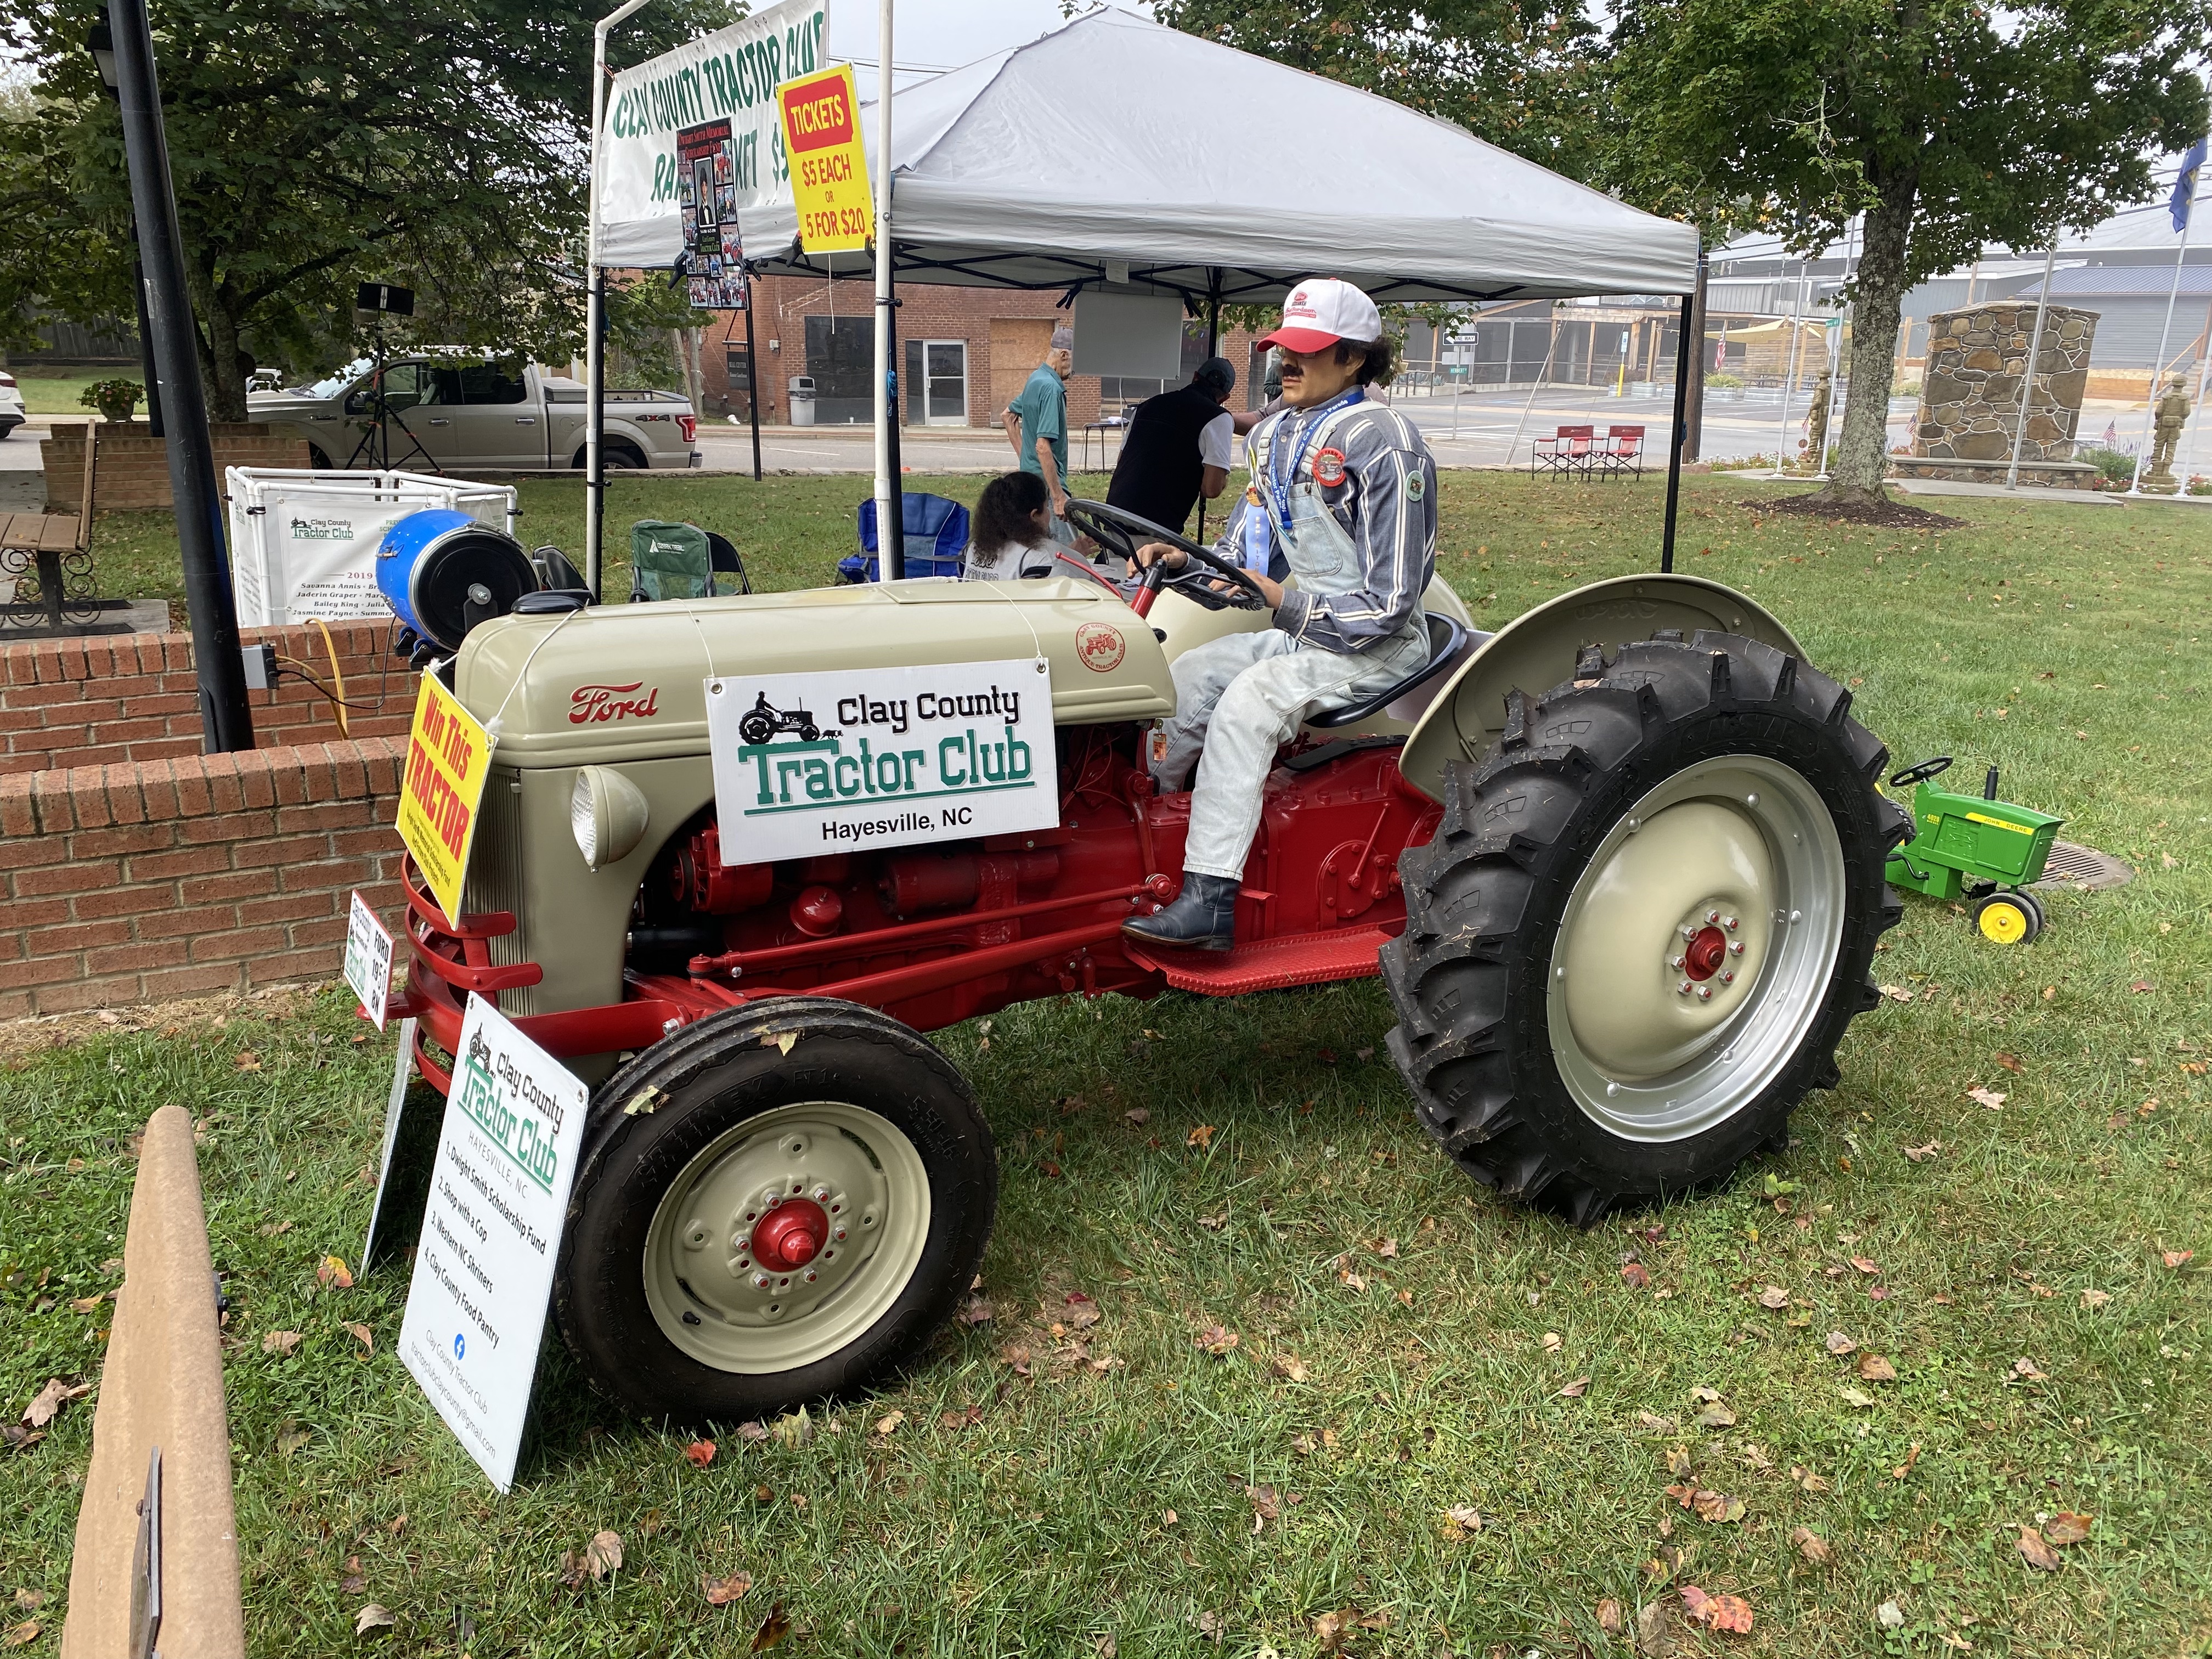 Prize Tractor with fake driver aboard